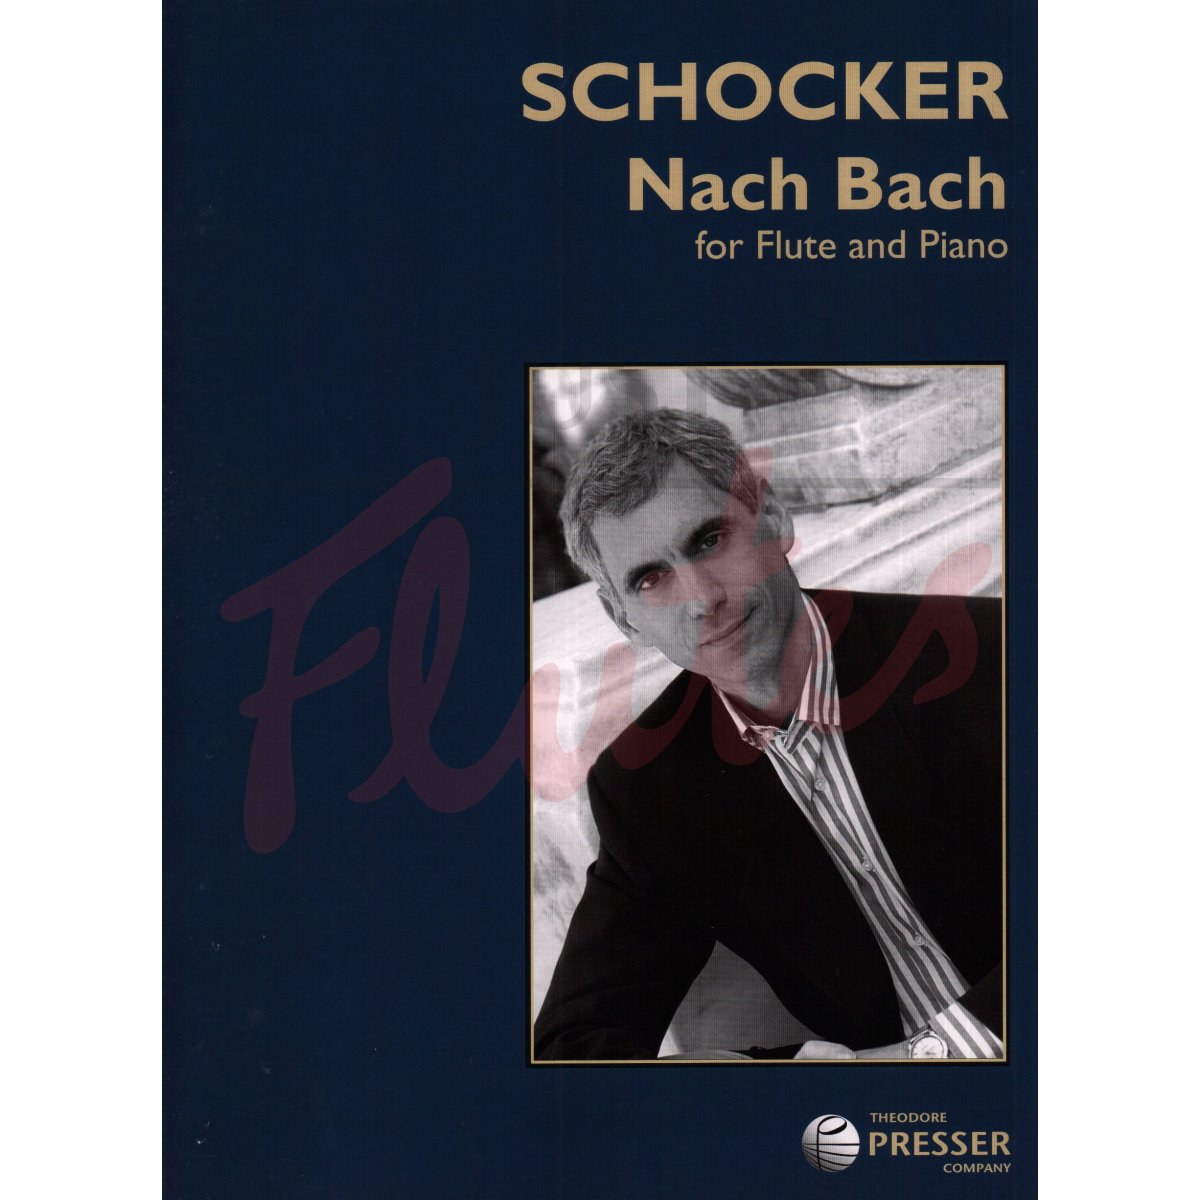 Nach Bach for Flute and Piano